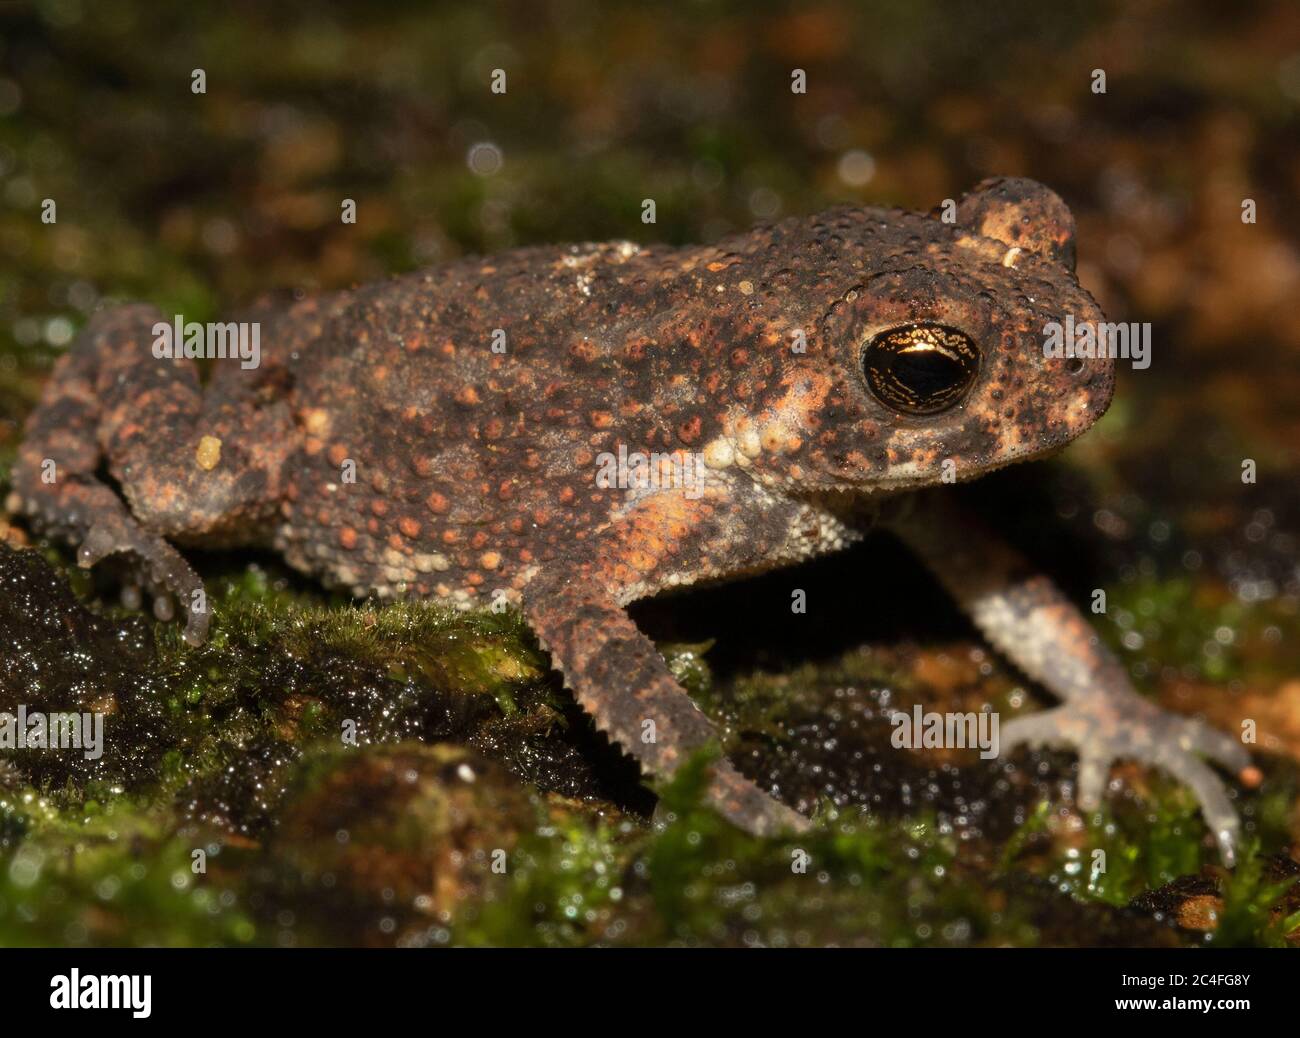 Bufo toad dwarf toad; brown toad; cute toad; little frog; Duttaphrynus scaber from Sri Lanka; common toad; toad in bathroom; Schneider's dwarf toad Stock Photo